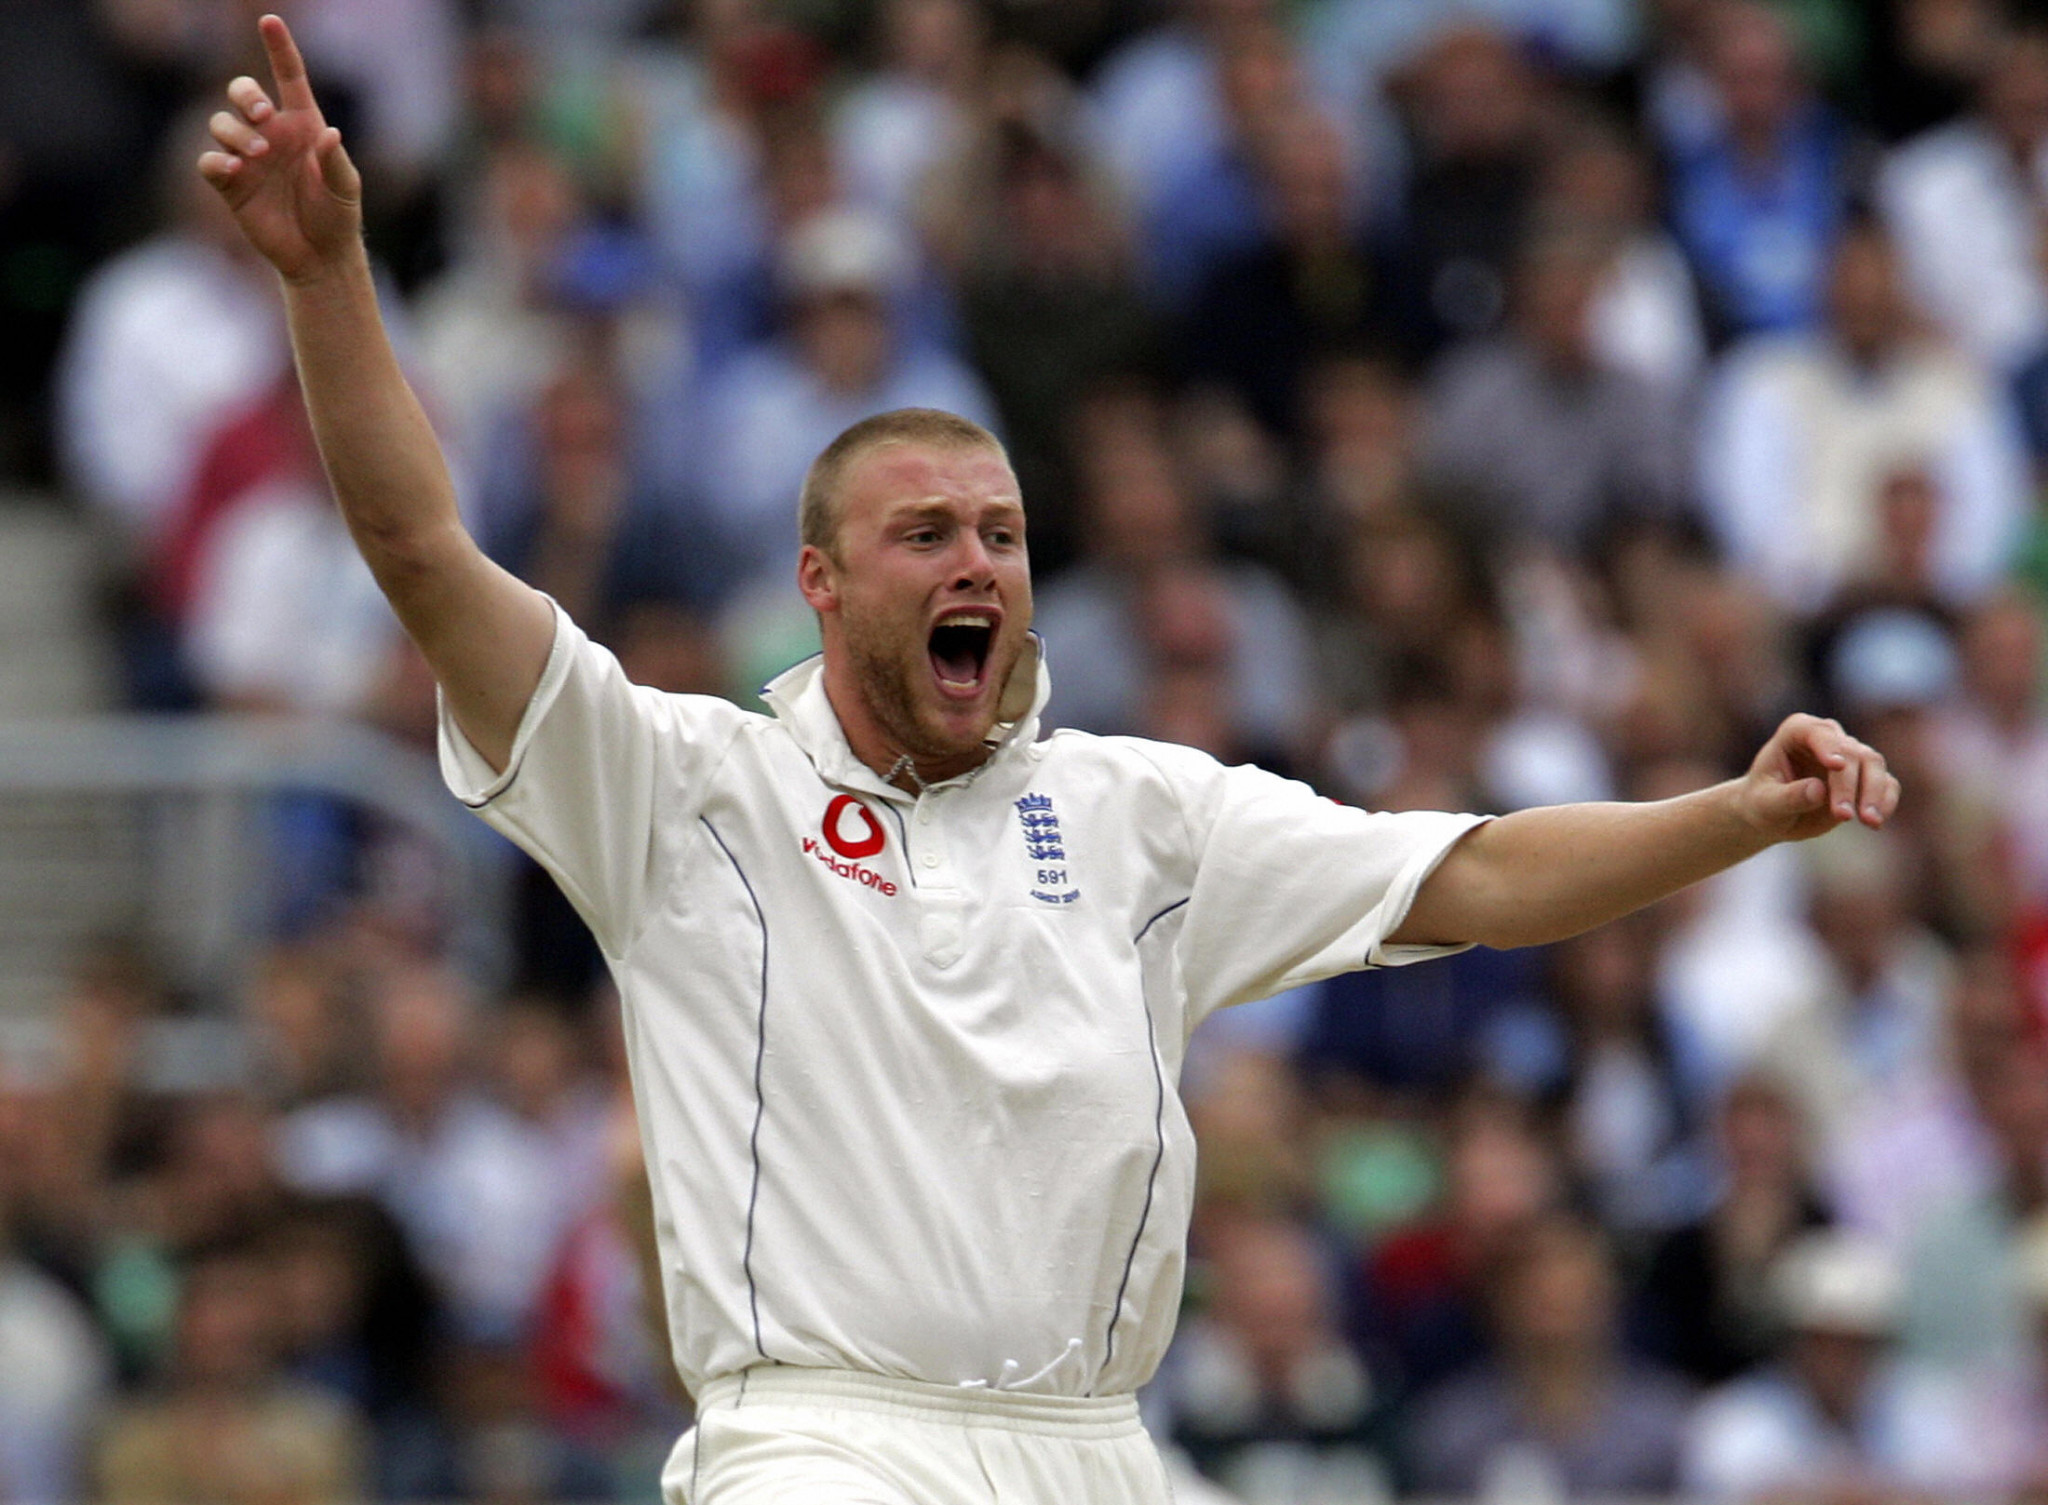 Andrew Flintoff was instrumental to England's victories in the 2005 and 2009 Ashes series ©Getty Images